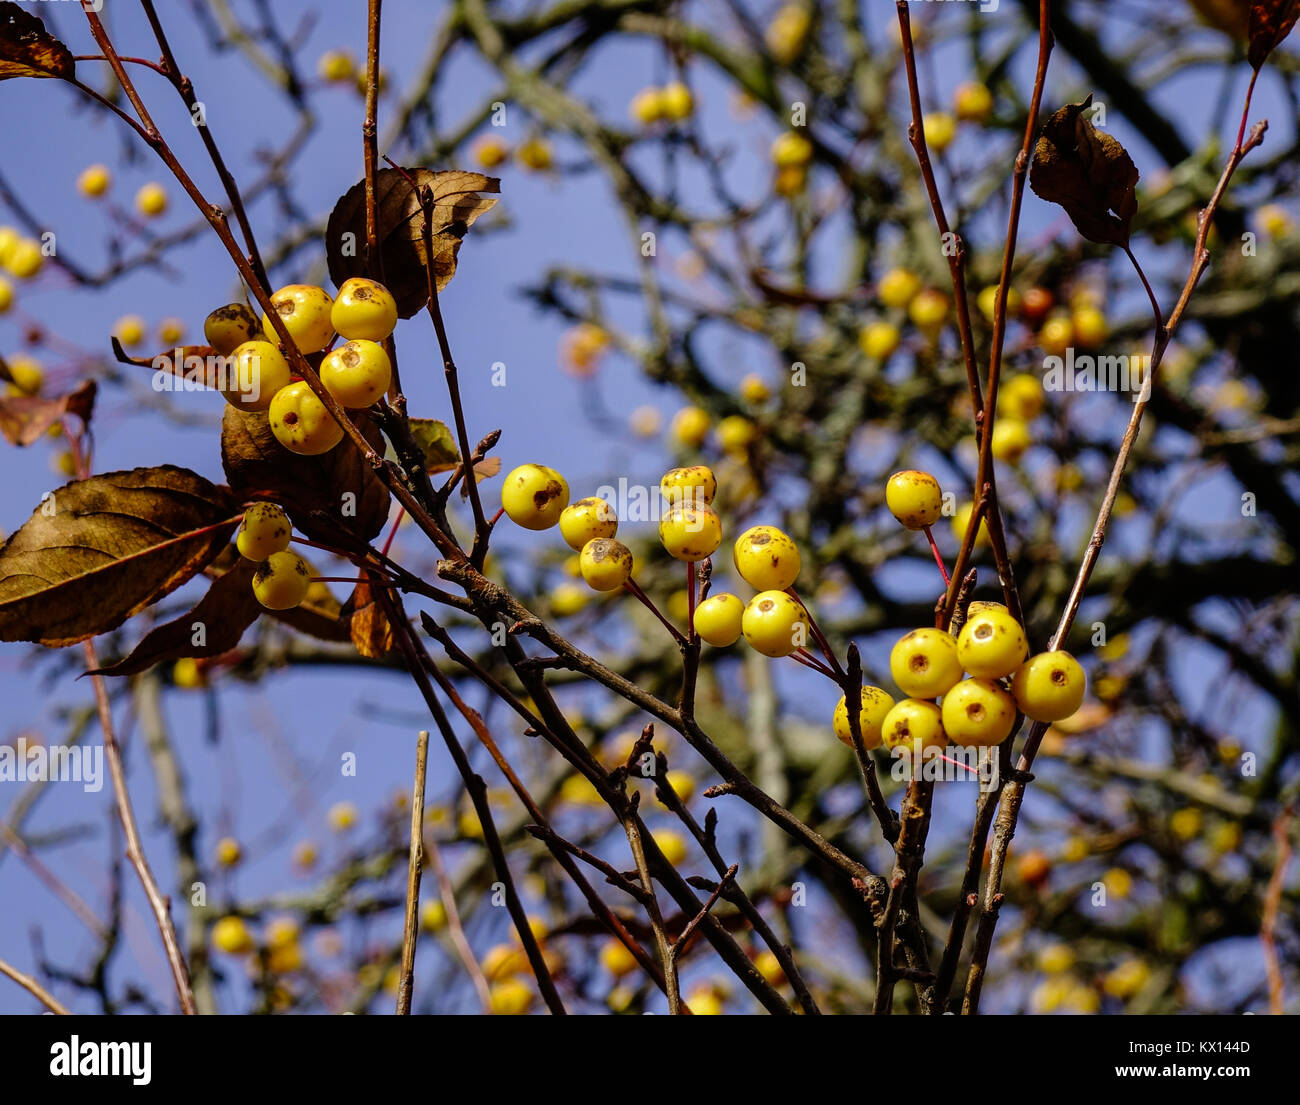 Yellow berry fruits on tree at autumn in Vyborg, Russia Stock Photo - Alamy